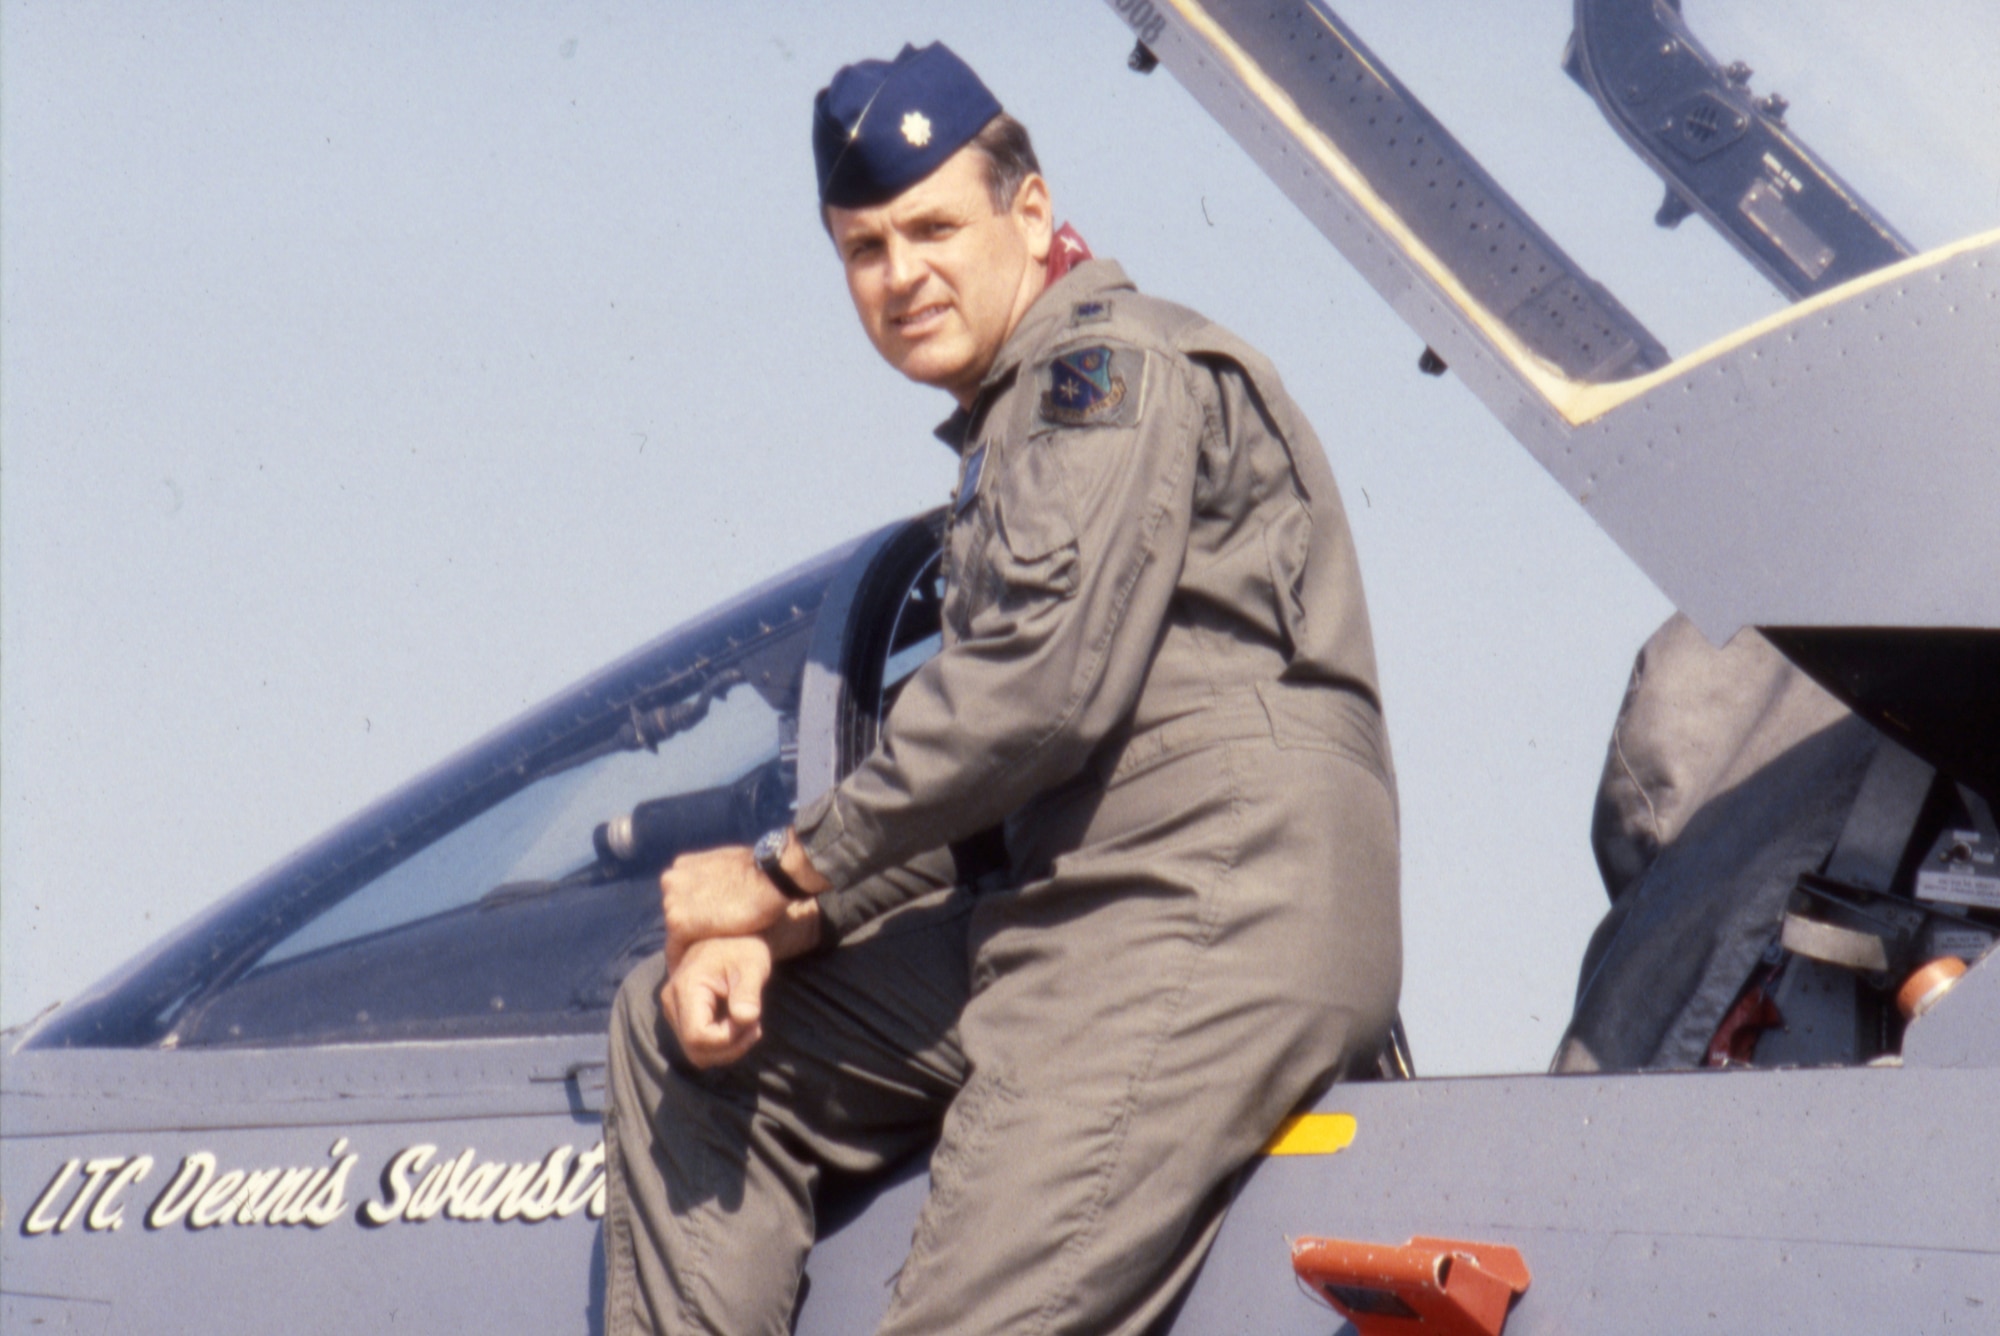 Colonel Dennis Swantrom 185th Fighter Wing Sioux City, Iowa